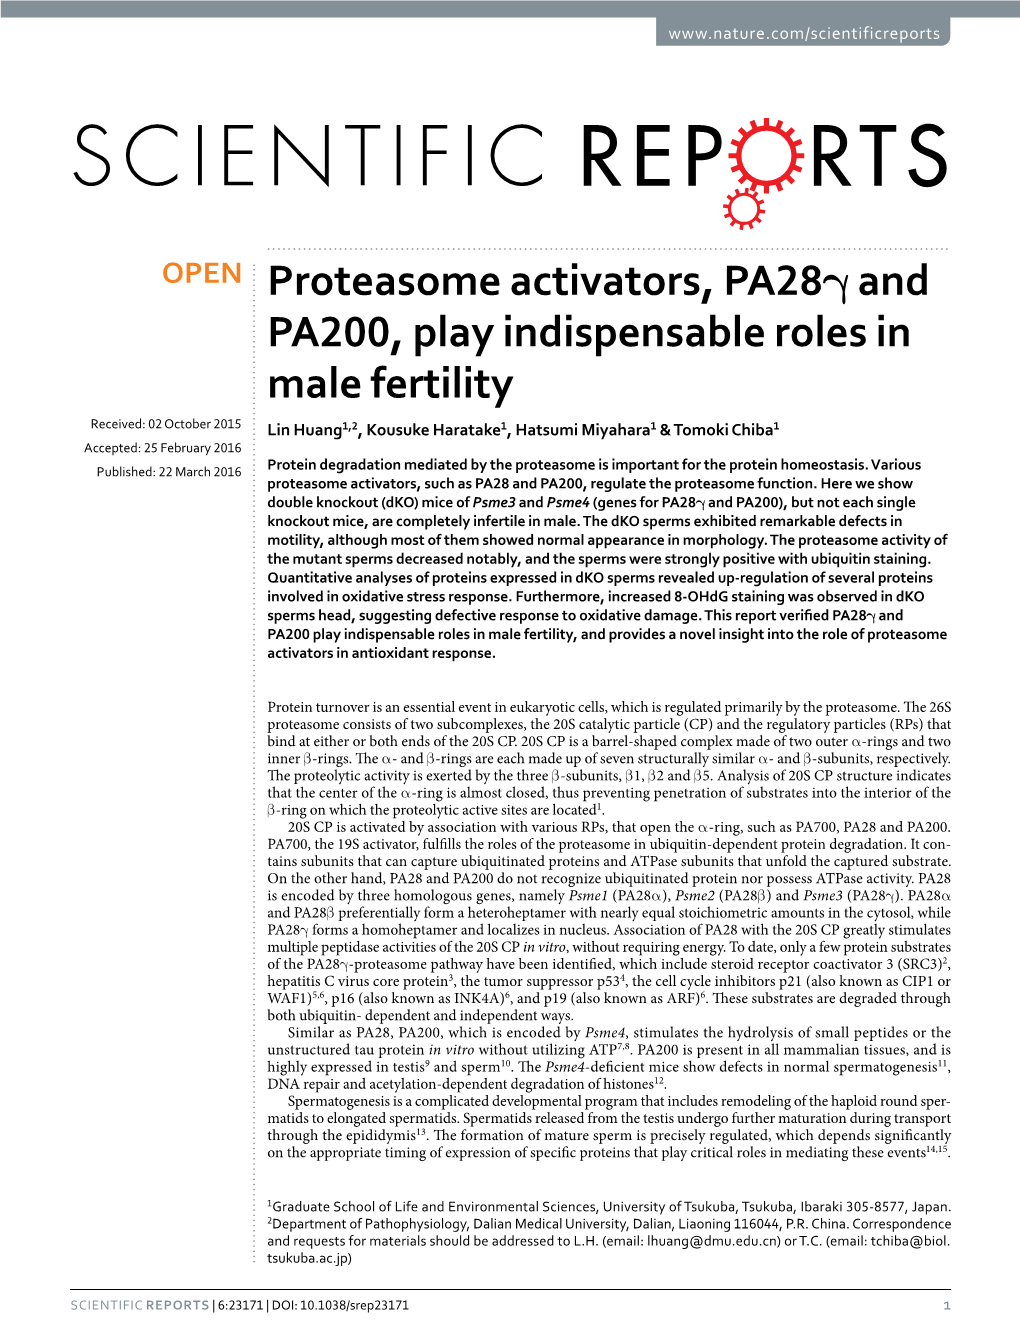 Proteasome Activators, Pa28γ and PA200, Play Indispensable Roles In